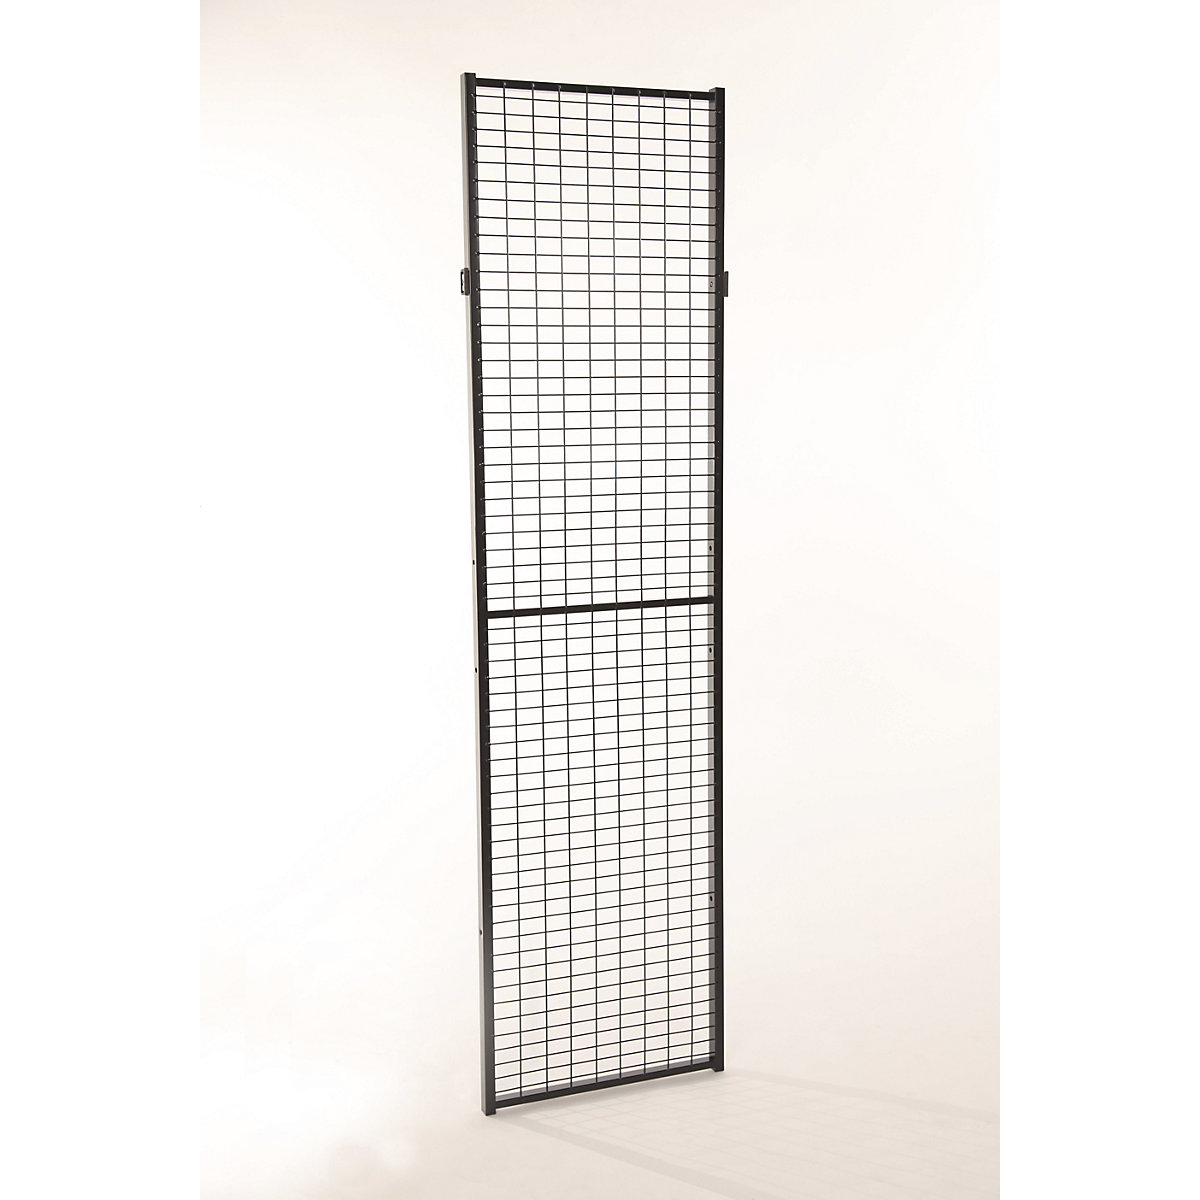 Axelent – X-GUARD CLASSIC machine protective fencing, wall section, height 1900 mm, width 400 mm